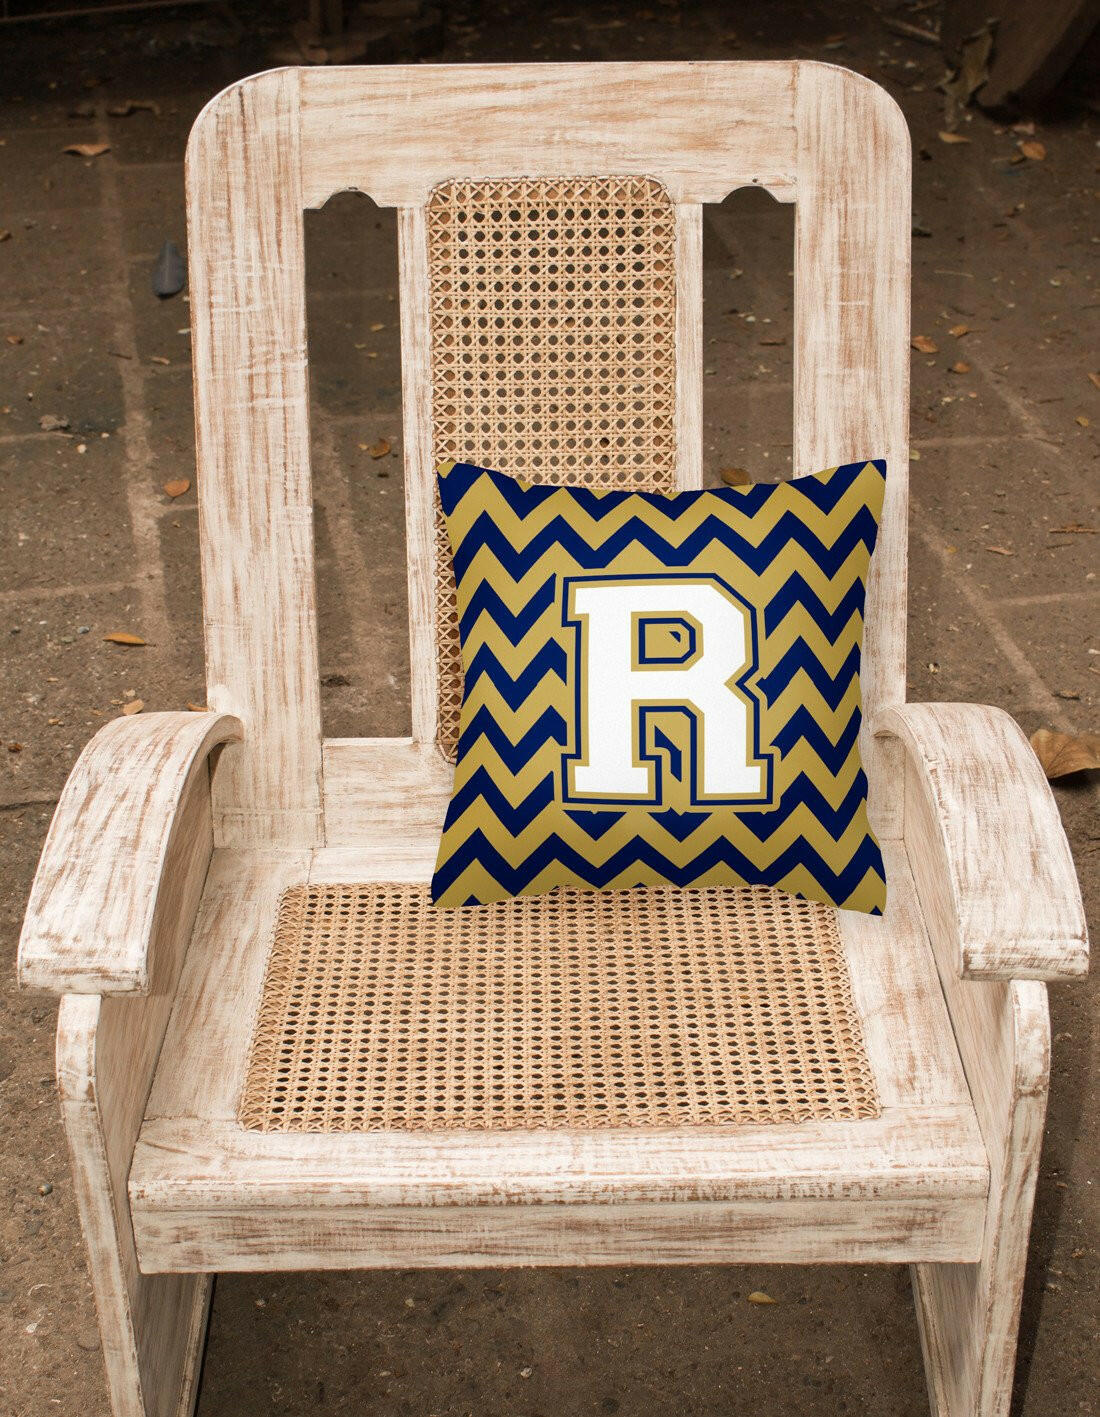 Letter R Chevron Navy Blue and Gold Fabric Decorative Pillow CJ1057-RPW1414 by Caroline's Treasures